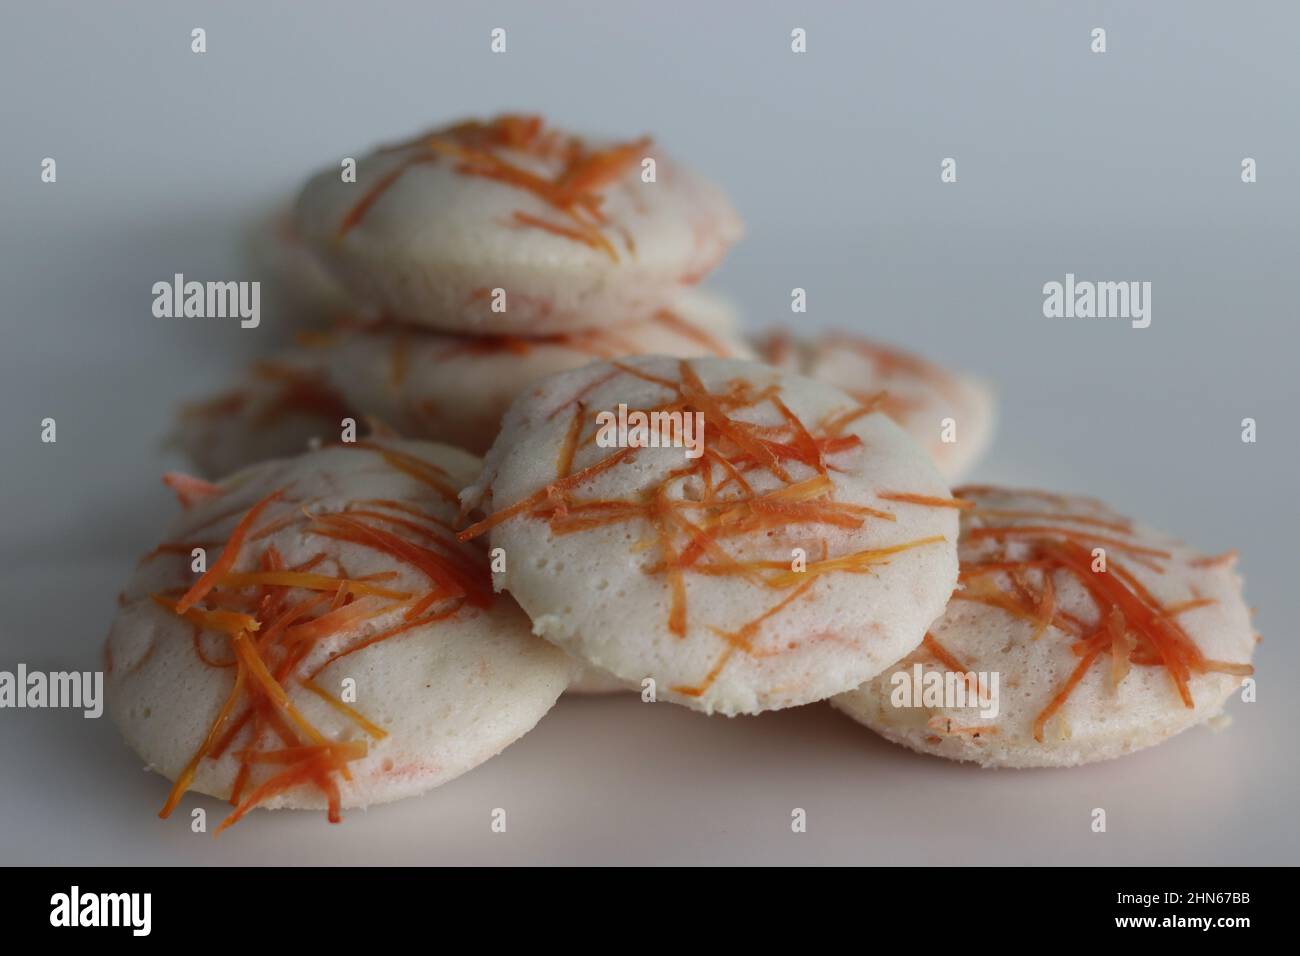 Carrot Idly. Steamed rice cakes with grated carrots. Shot on white background Stock Photo